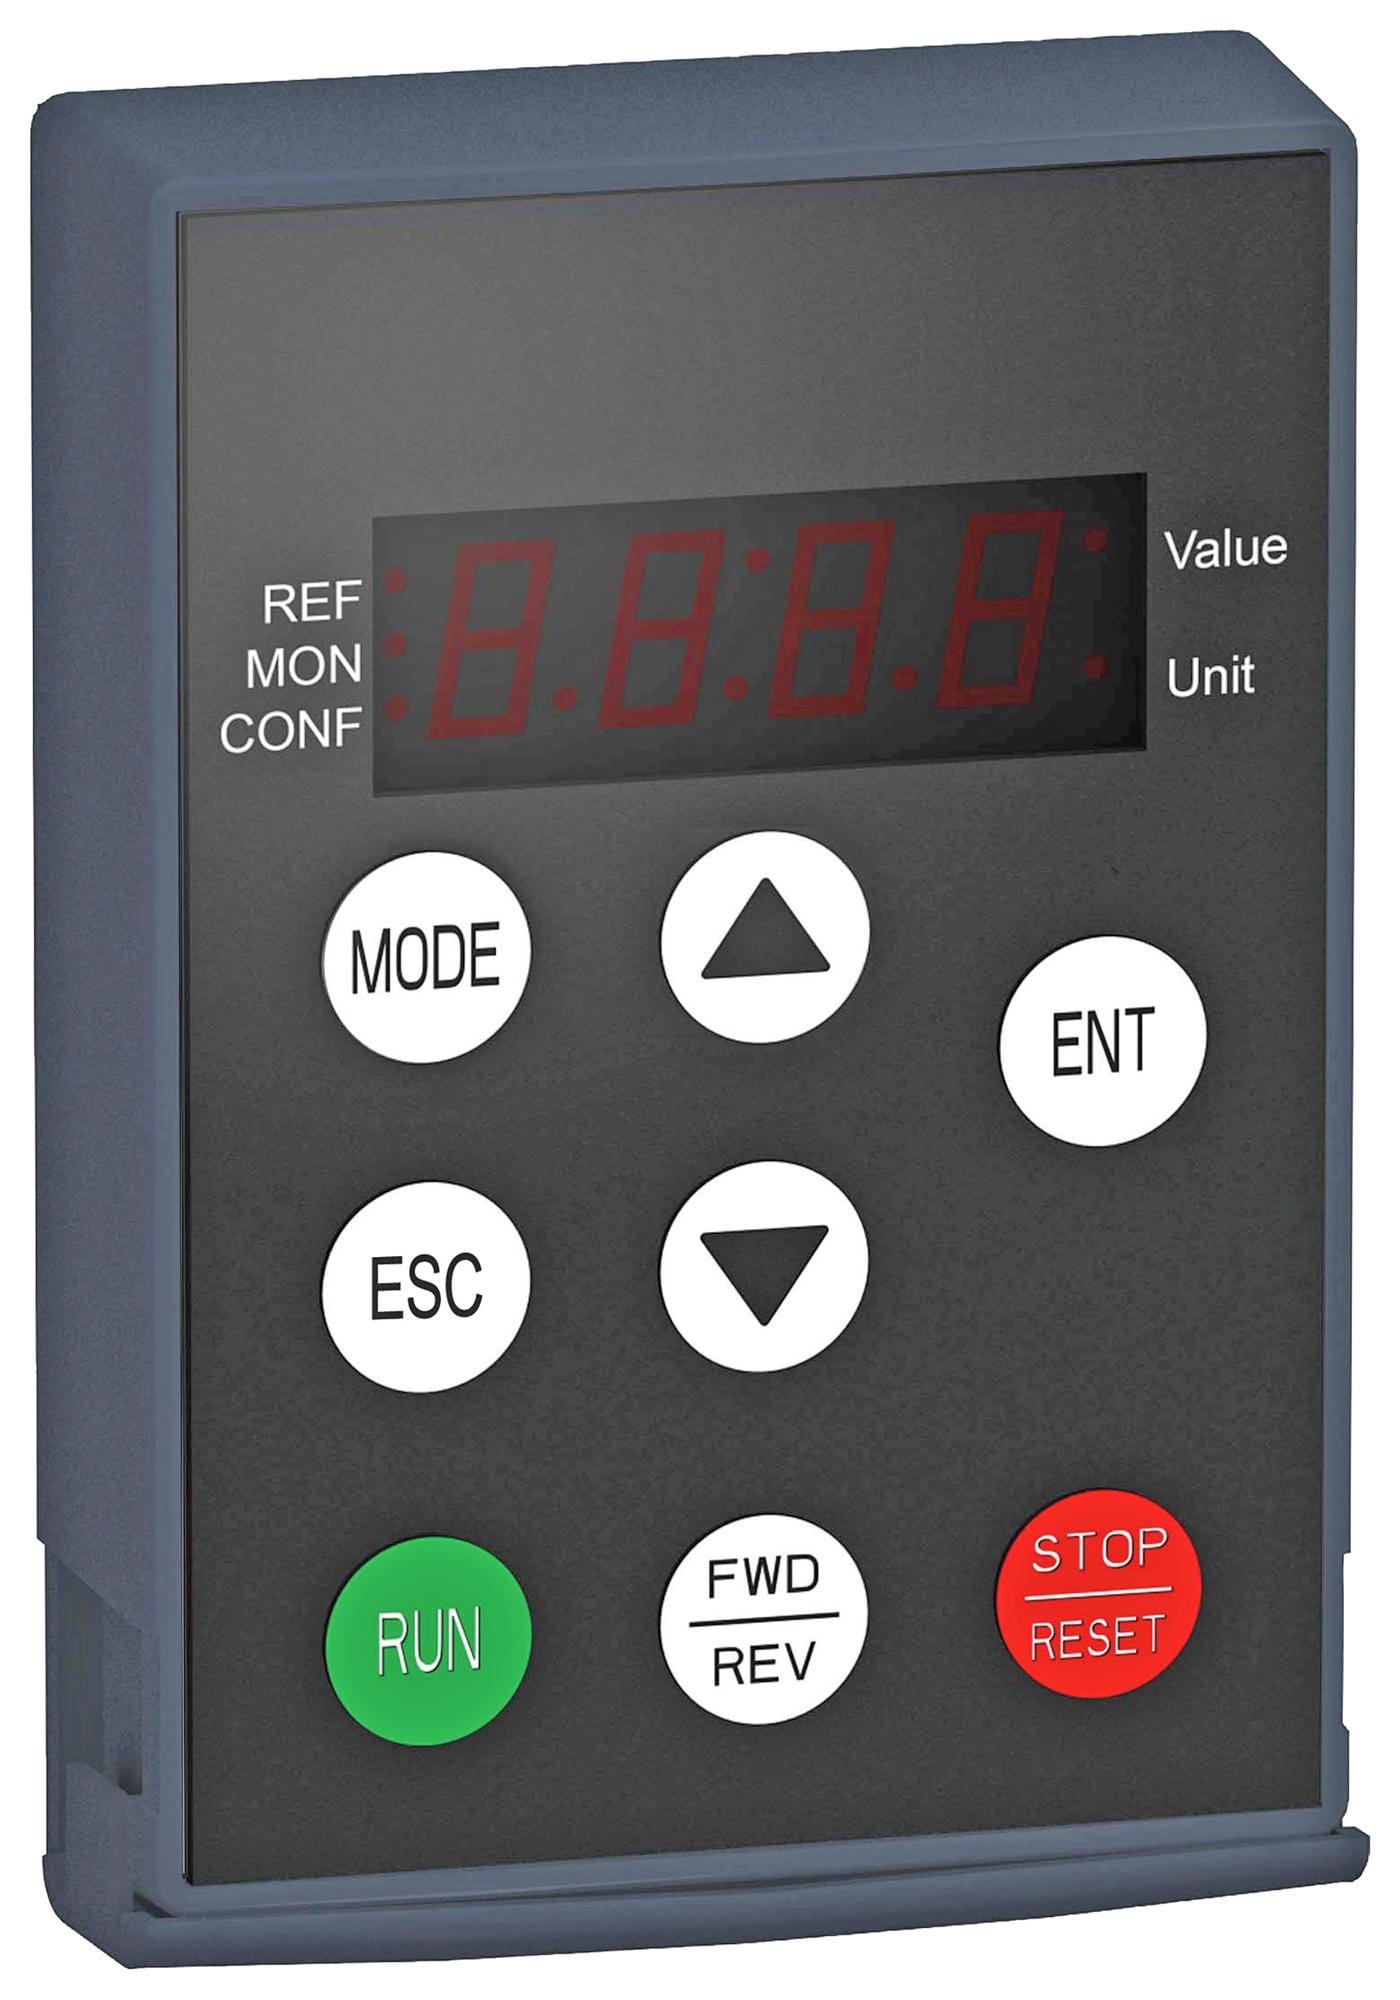 VW3A1007 REMOTE TERMINAL, VARIABLE SPEED DRIVE SCHNEIDER ELECTRIC